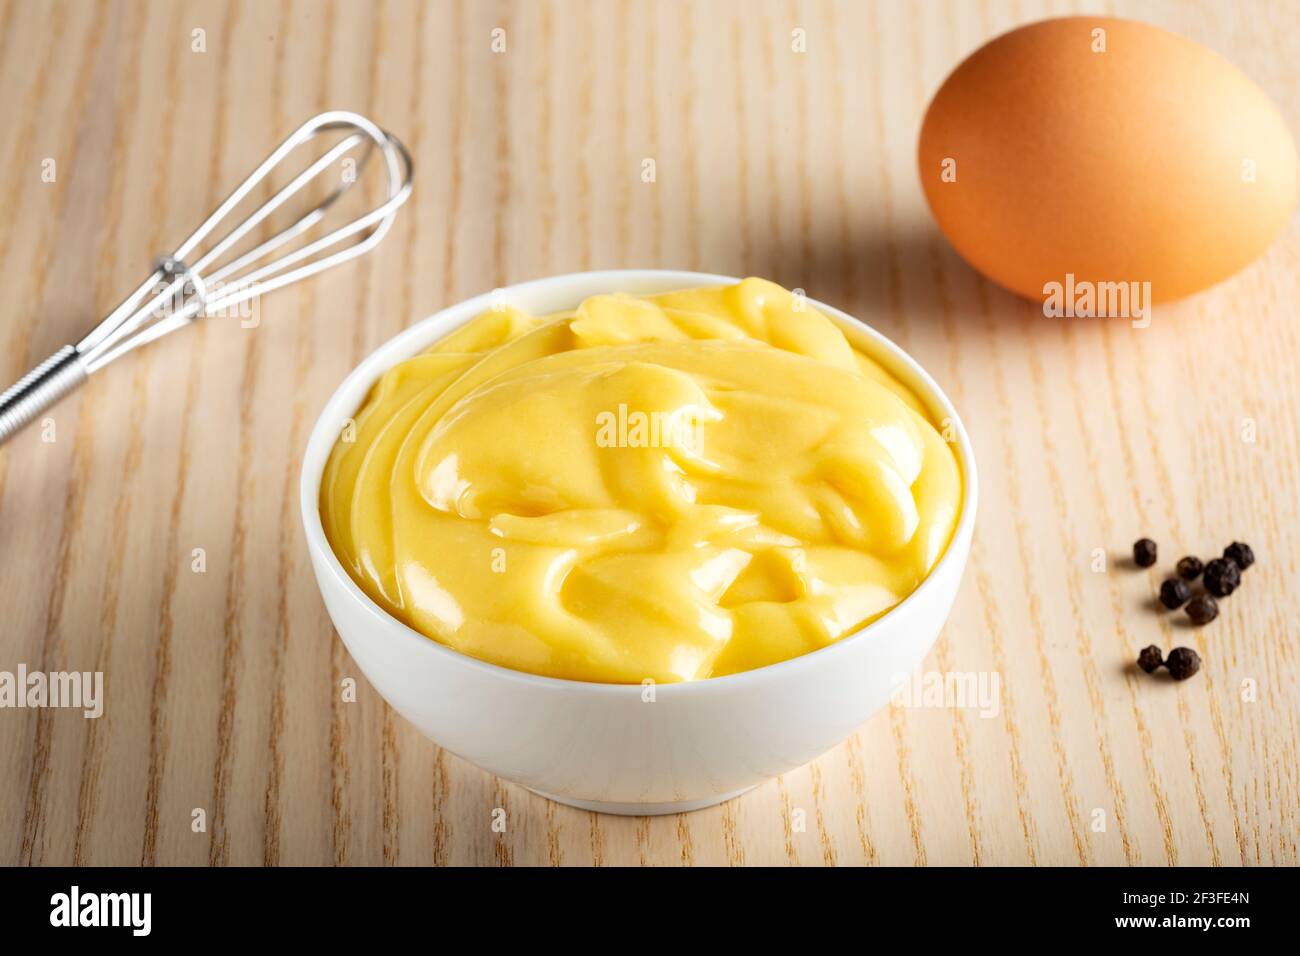 Homemade mayonnaise in a white bowl Stock Photo